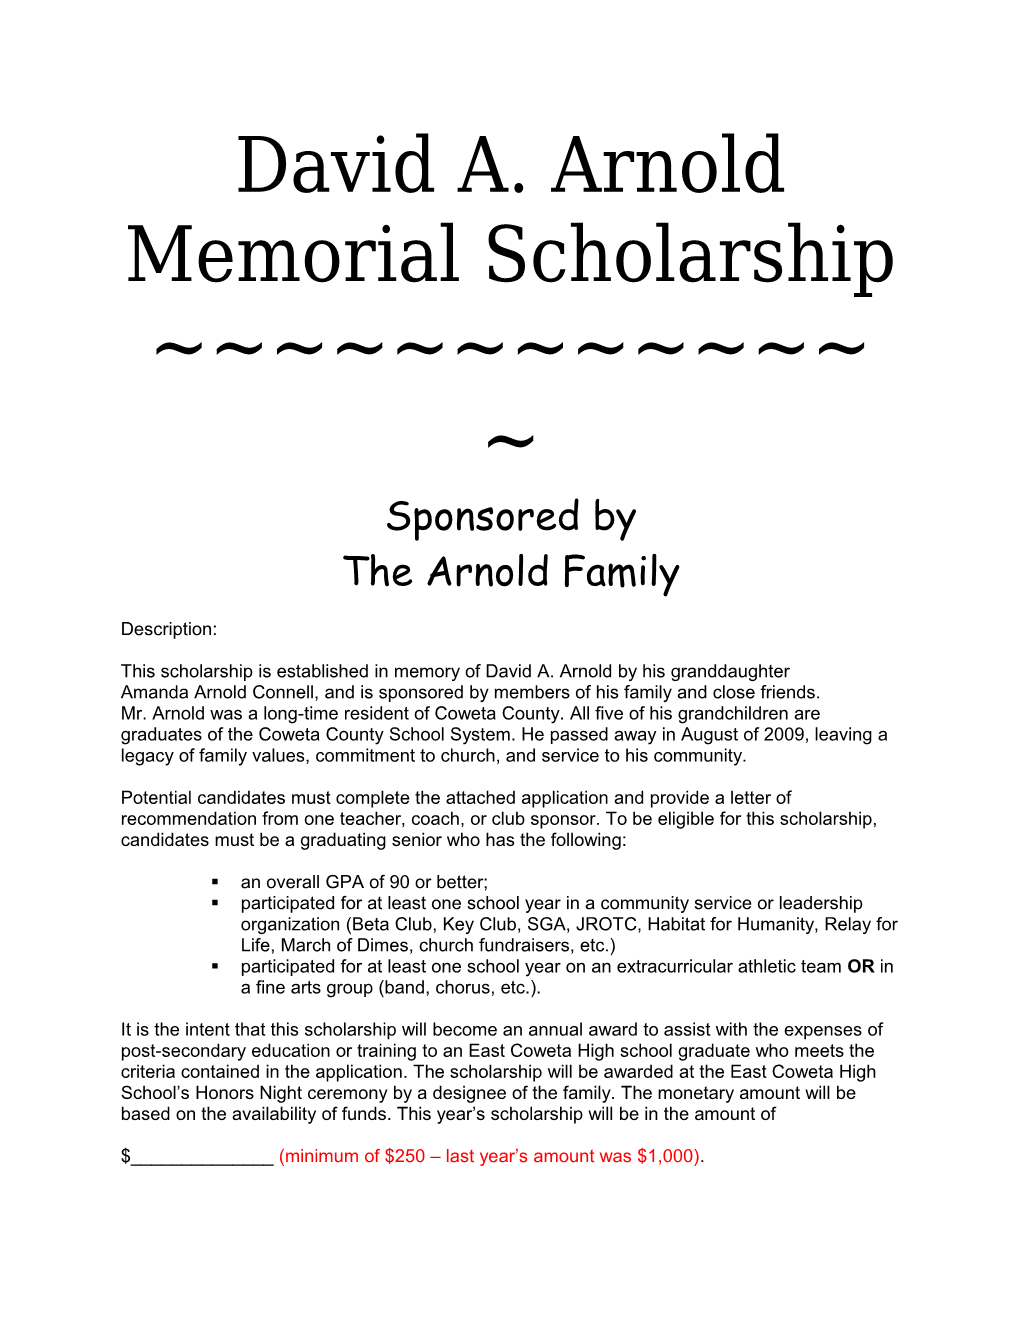 This Scholarship Is Established in Memory of David A. Arnold by His Granddaughter